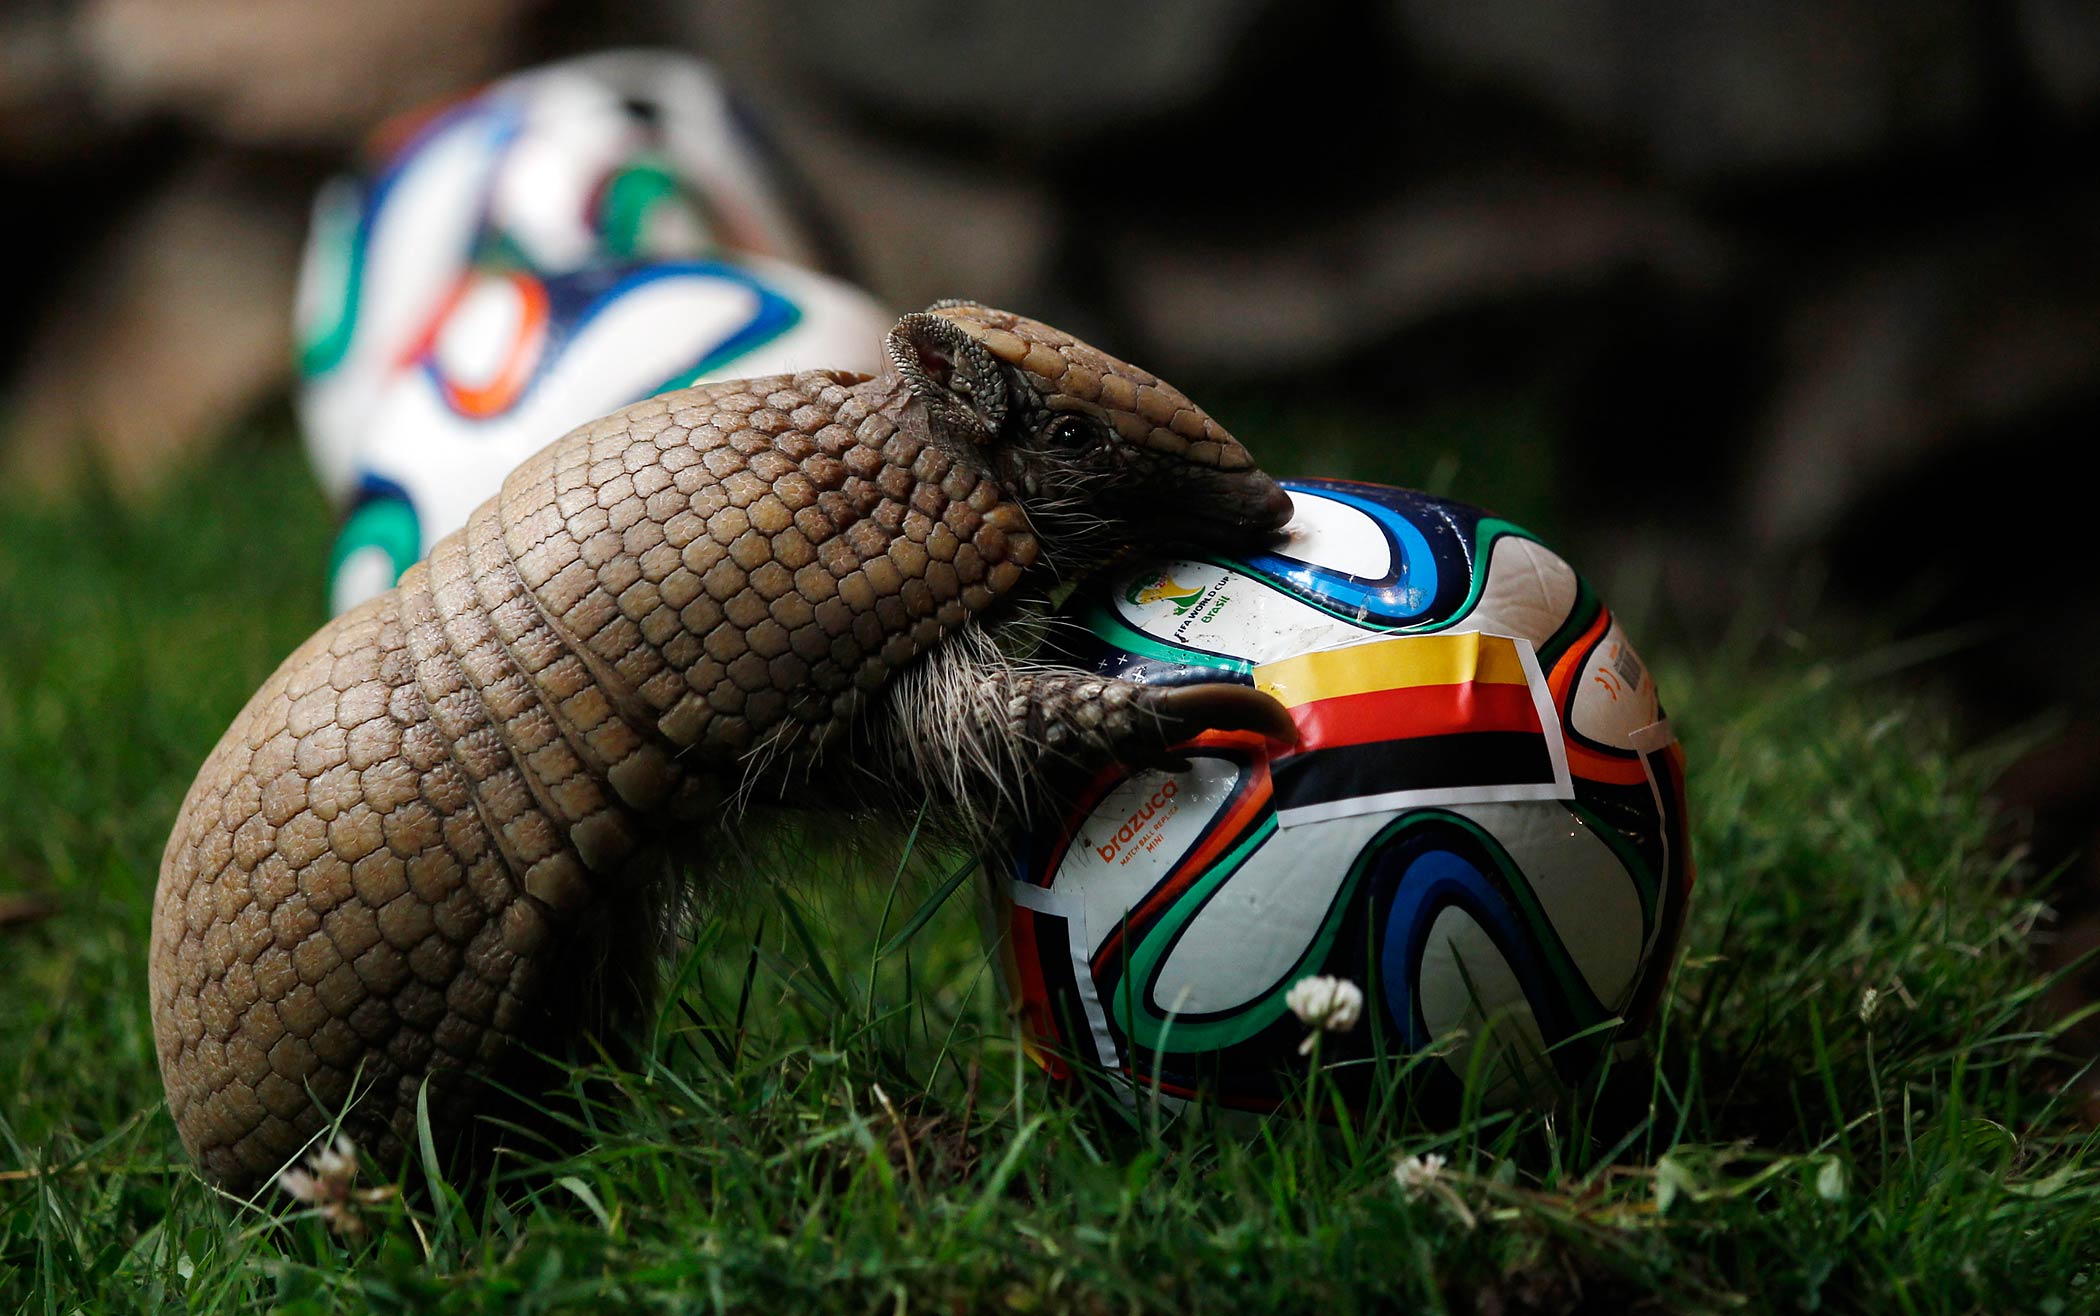 The armadillo called Norman, Germany's World Cup oracle, approaches the soccer ball representing Germany as he makes his prediction for the team's opening World Cup match against Portugal on June 16, at the zoo in the western city of Muenster